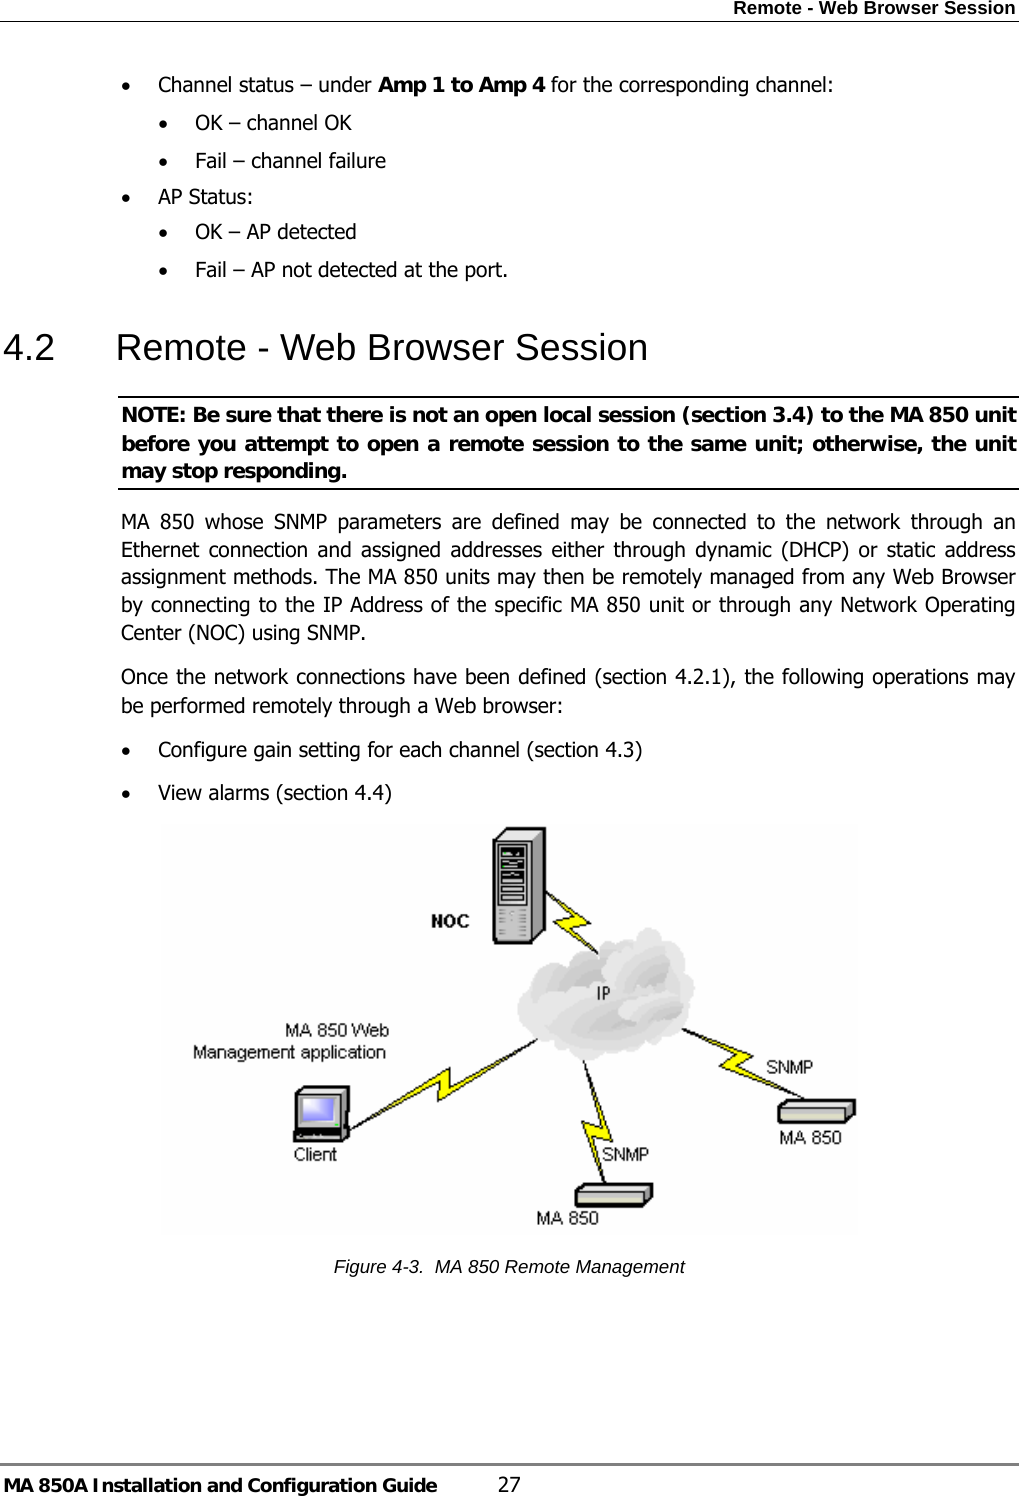 Remote - Web Browser Session MA 850A Installation and Configuration Guide  27 • Channel status – under Amp 1 to Amp 4 for the corresponding channel: • OK – channel OK • Fail – channel failure • AP Status: • OK – AP detected • Fail – AP not detected at the port. 4.2  Remote - Web Browser Session NOTE: Be sure that there is not an open local session (section  3.4) to the MA 850 unit before you attempt to open a remote session to the same unit; otherwise, the unit may stop responding. MA 850 whose SNMP parameters are defined may be connected to the network through an Ethernet connection and assigned addresses either through dynamic (DHCP) or static address assignment methods. The MA 850 units may then be remotely managed from any Web Browser by connecting to the IP Address of the specific MA 850 unit or through any Network Operating Center (NOC) using SNMP.   Once the network connections have been defined (section  4.2.1), the following operations may be performed remotely through a Web browser:  • Configure gain setting for each channel (section  4.3) • View alarms (section  4.4)  Figure  4-3.  MA 850 Remote Management  